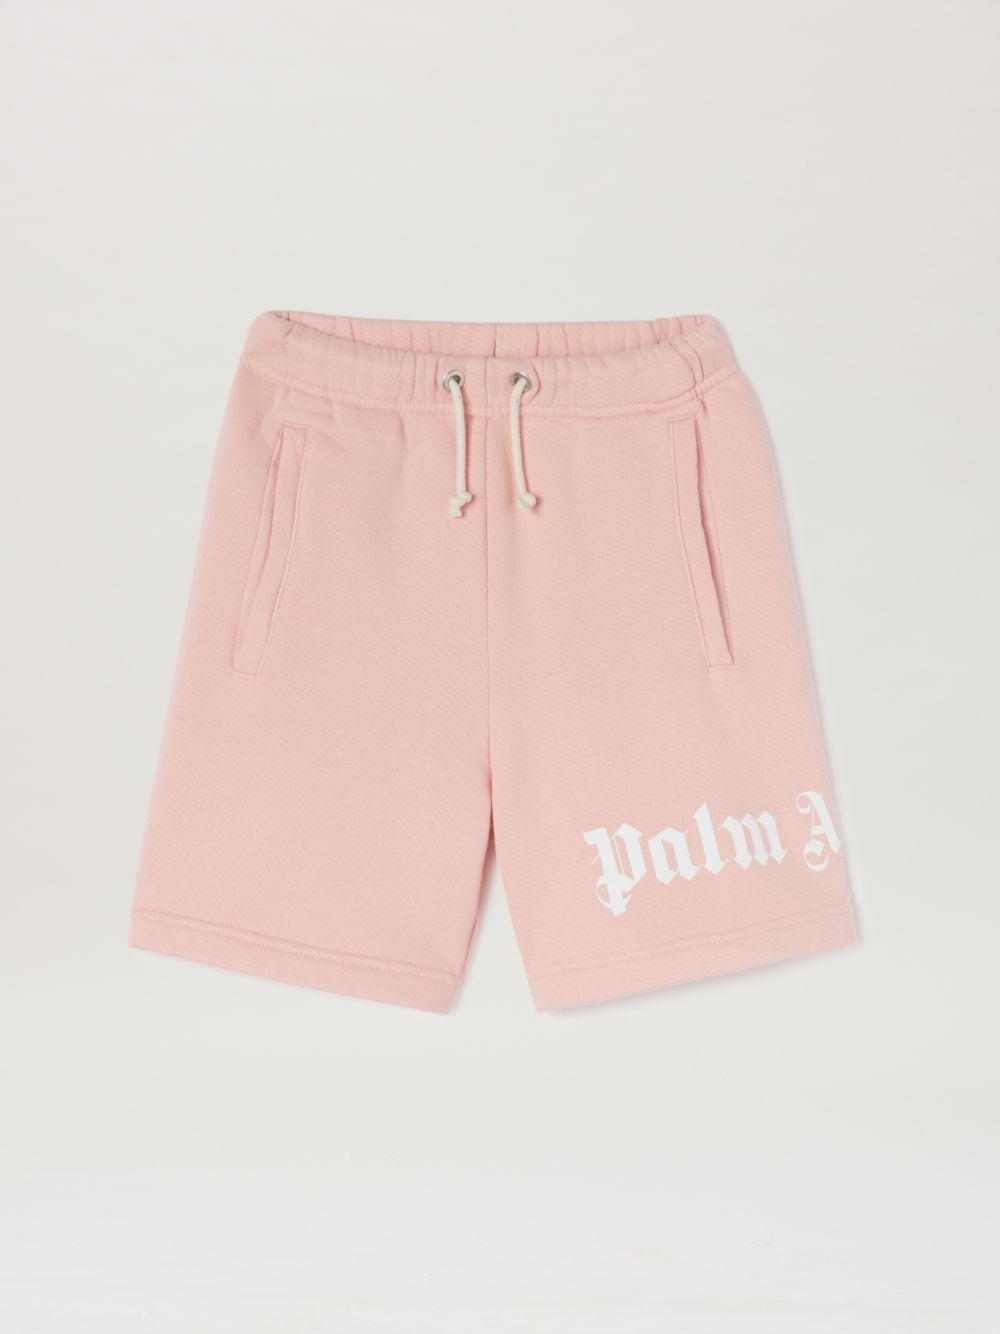 LOGO SWEATSHORTS in pink - Palm Angels® Official